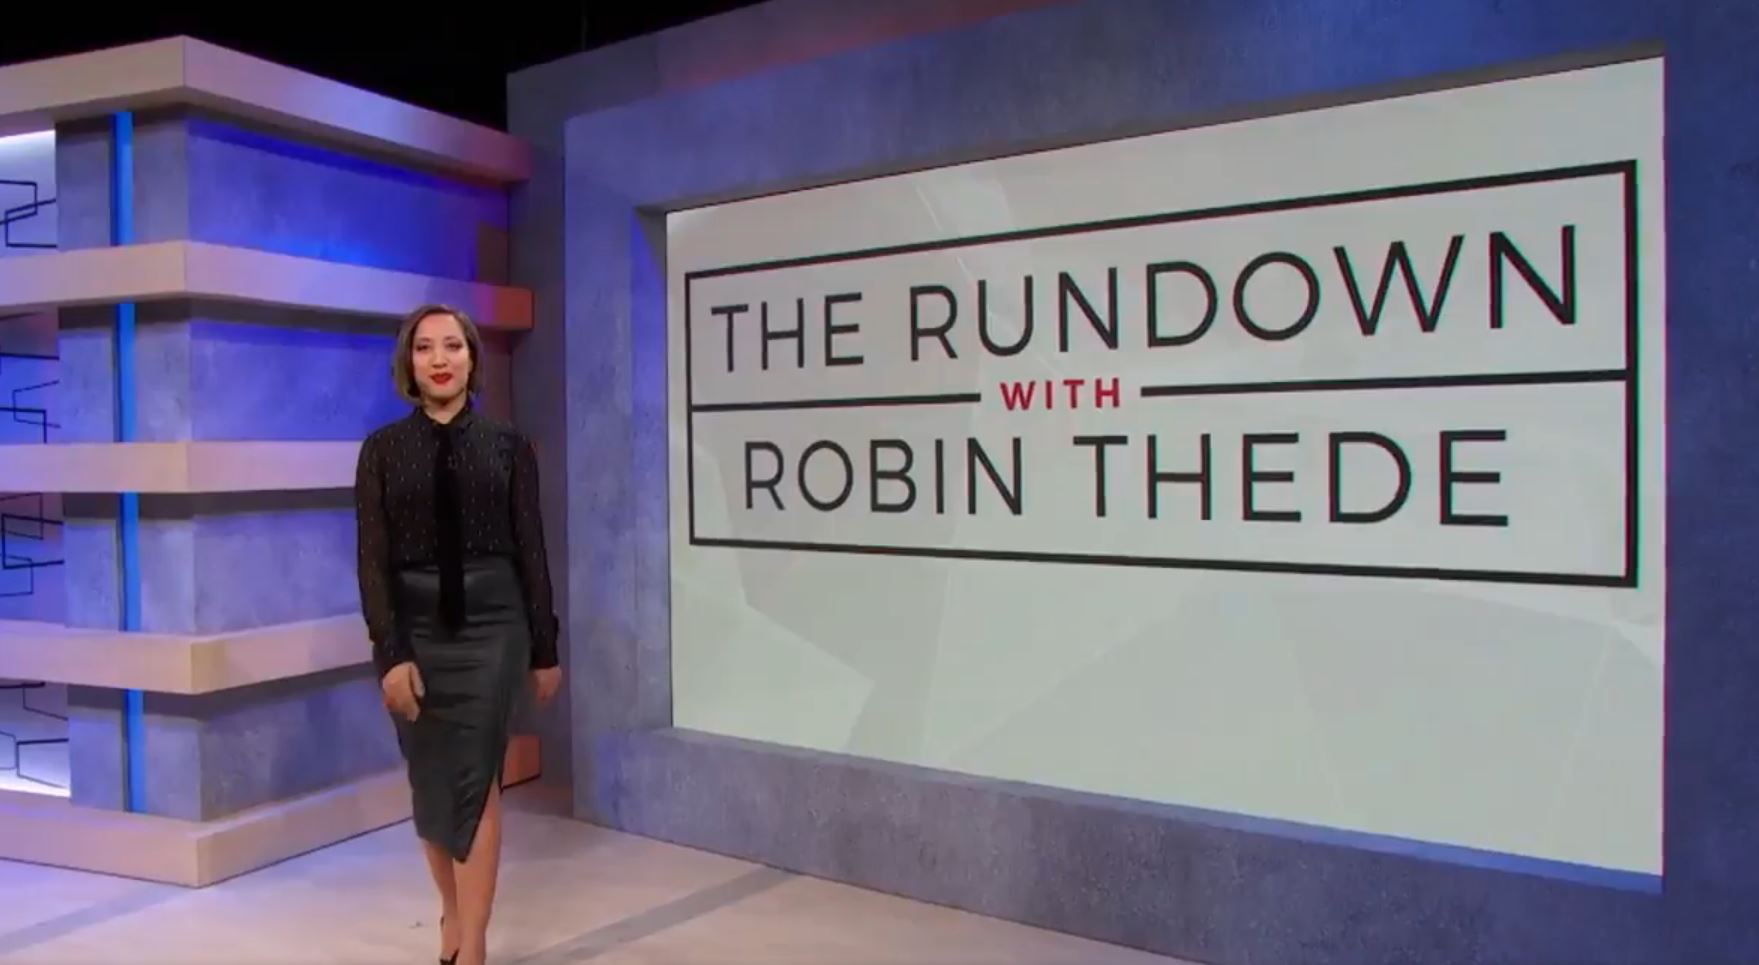 When Does The Rundown With Robin Thede Season 2 Start? (Cancelled or Renewed)